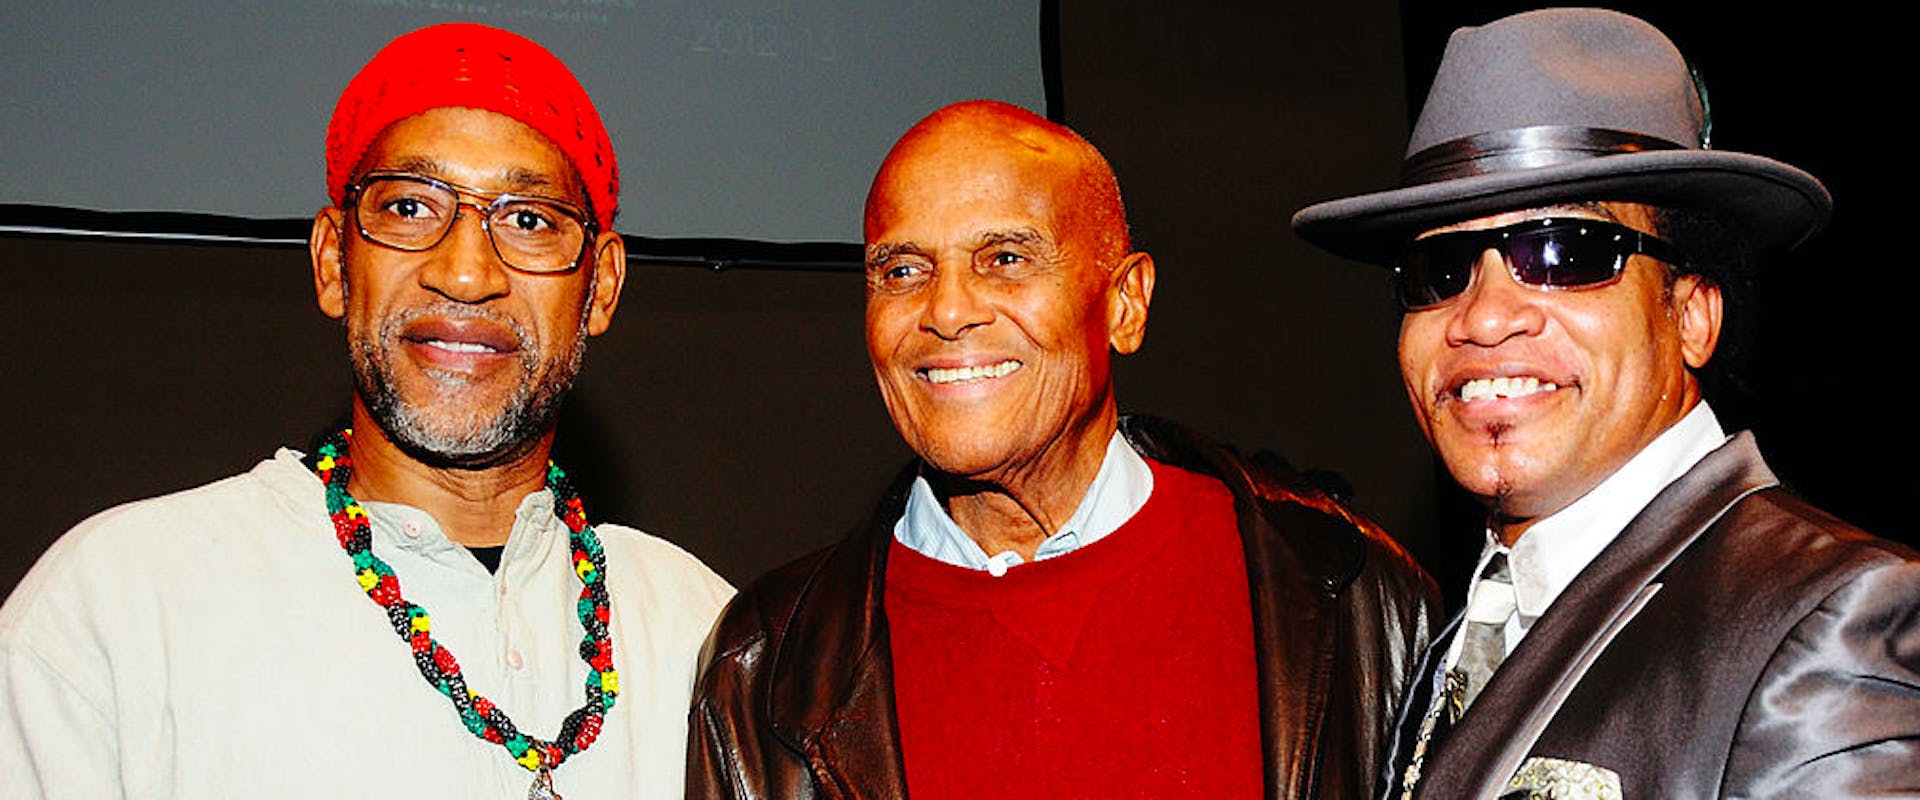 NEW YORK, NY - OCTOBER 20: (L-R) DJ Kool Herc, Harry Belafonte and Melle Mel attend the "Beat Street" screening, panel & performance hosted by the Tribeca Film Institute at The Schomburg Center for Research in Black Culture on October 20, 2012 in New York City.